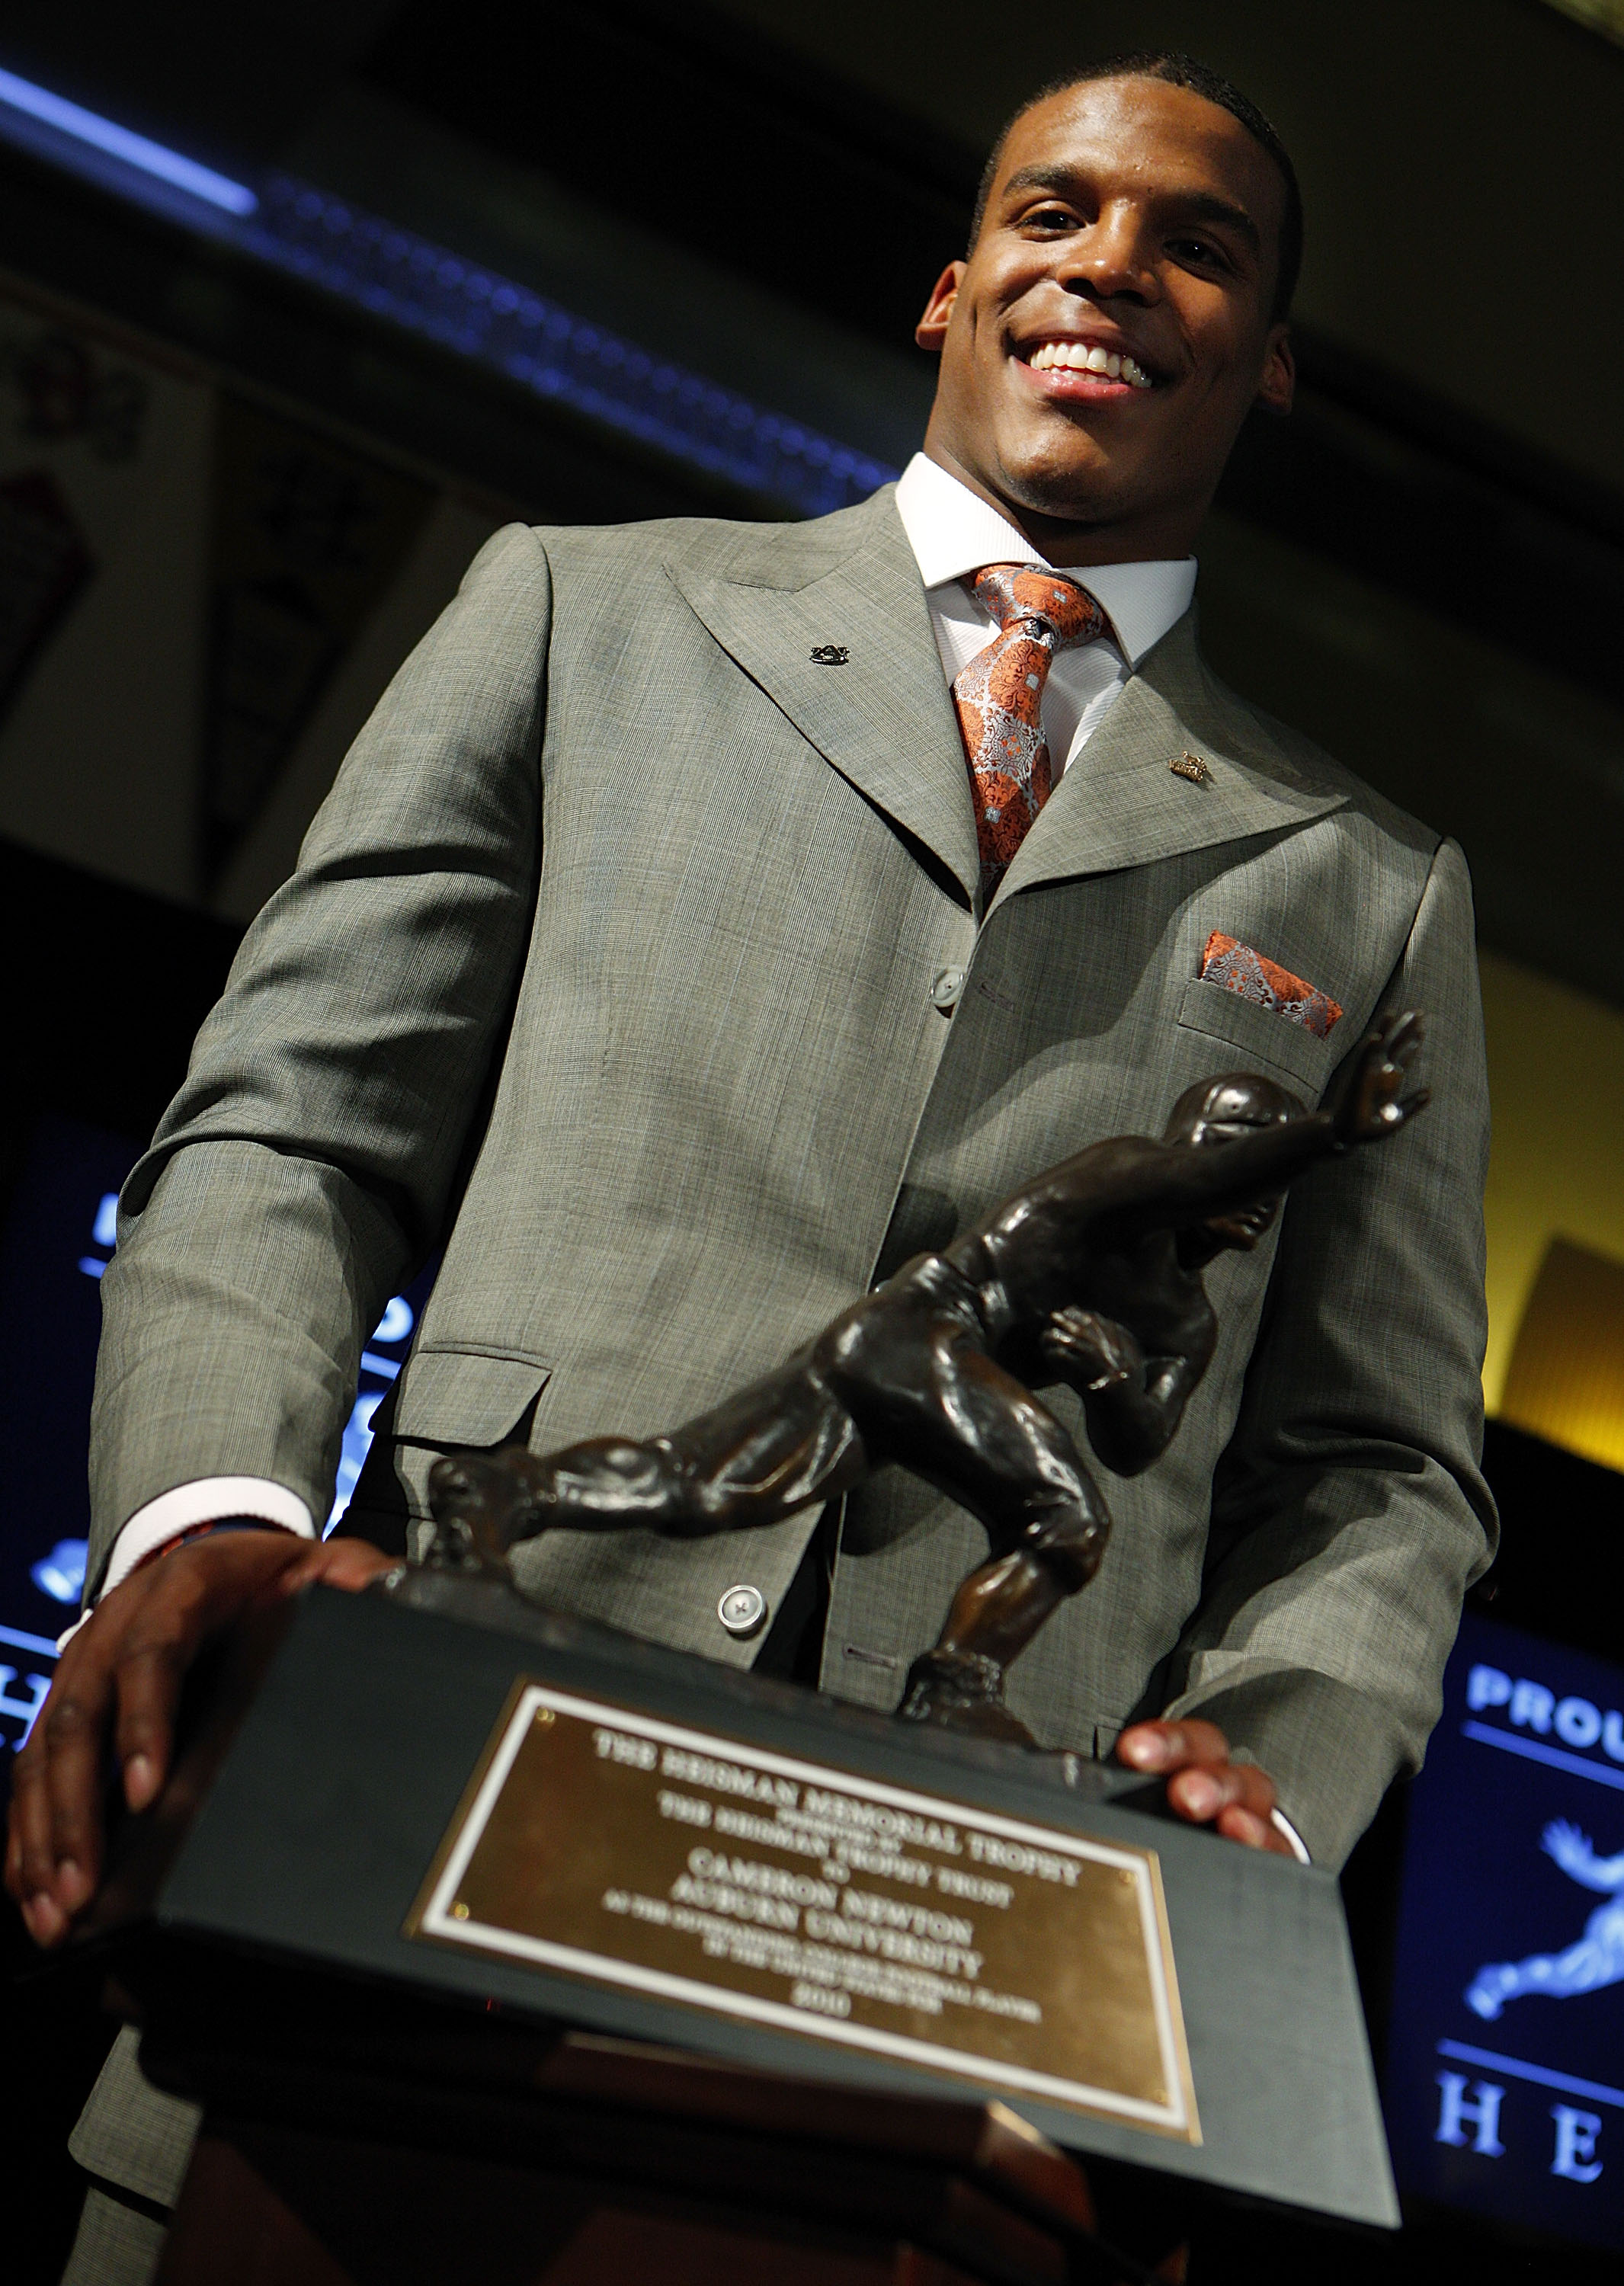 NEW YORK - DECEMBER 11:  Cam Newton, quarterback of the Auburn University Tigers, speaks after being awarded the 2010 Heisman Memorial Trophy Award on December 11, 2010 in New York City.  (Photo by Jeff Zelevansky/Getty Images)